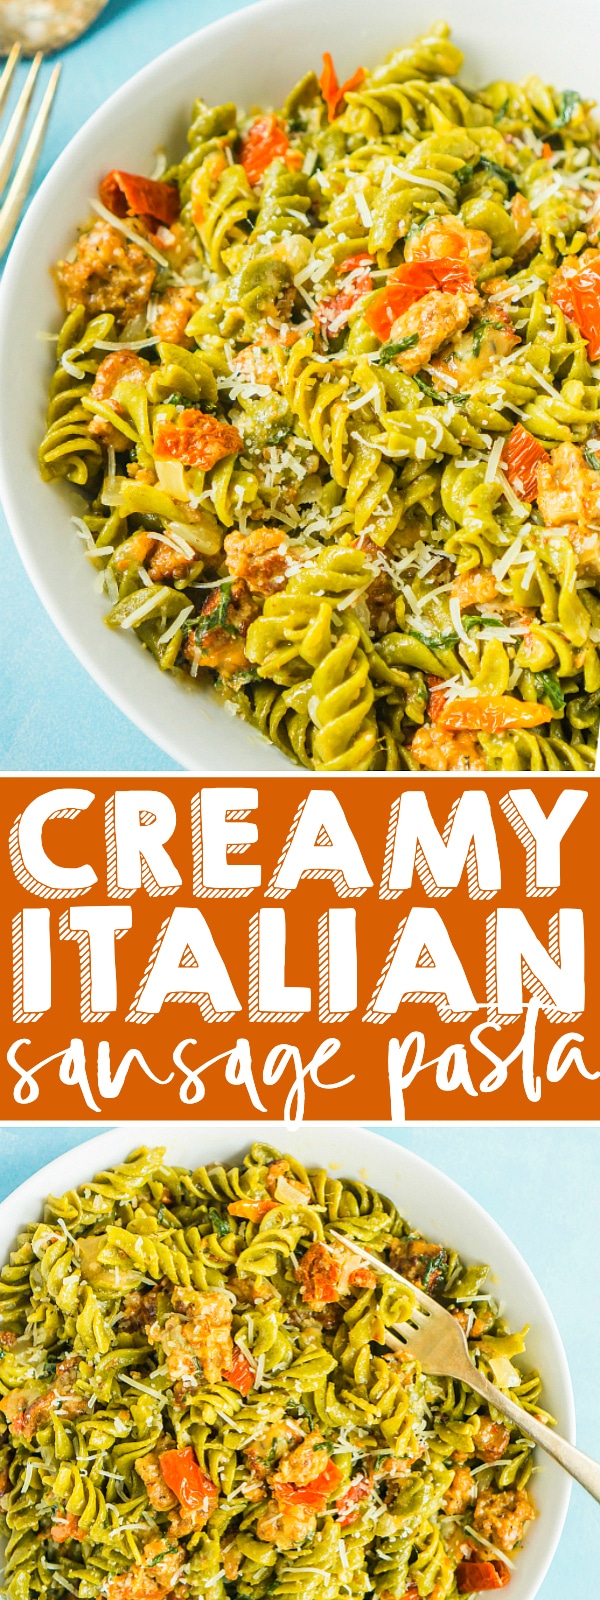 An easy and delicious creamy Italian Sausage Pasta recipe that is ready in 30 minutes and sneaks in extra veggies for the family to enjoy with a fortified veggie pasta! | THE LOVE NERDS #easydinner #weeknightdinner #pastarecipe